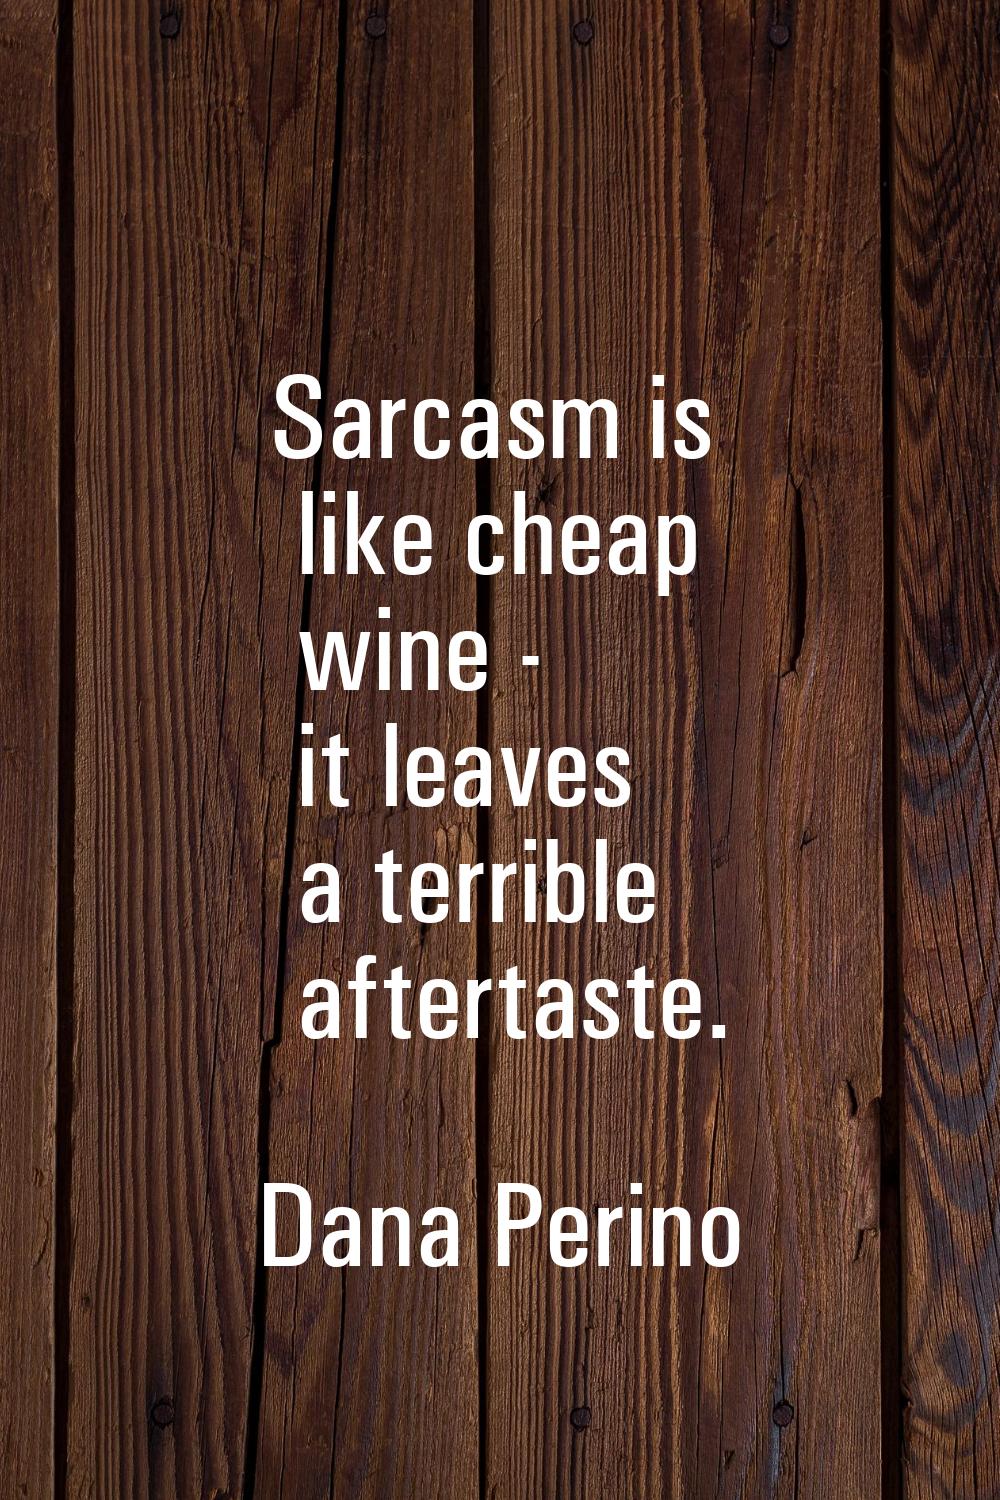 Sarcasm is like cheap wine - it leaves a terrible aftertaste.